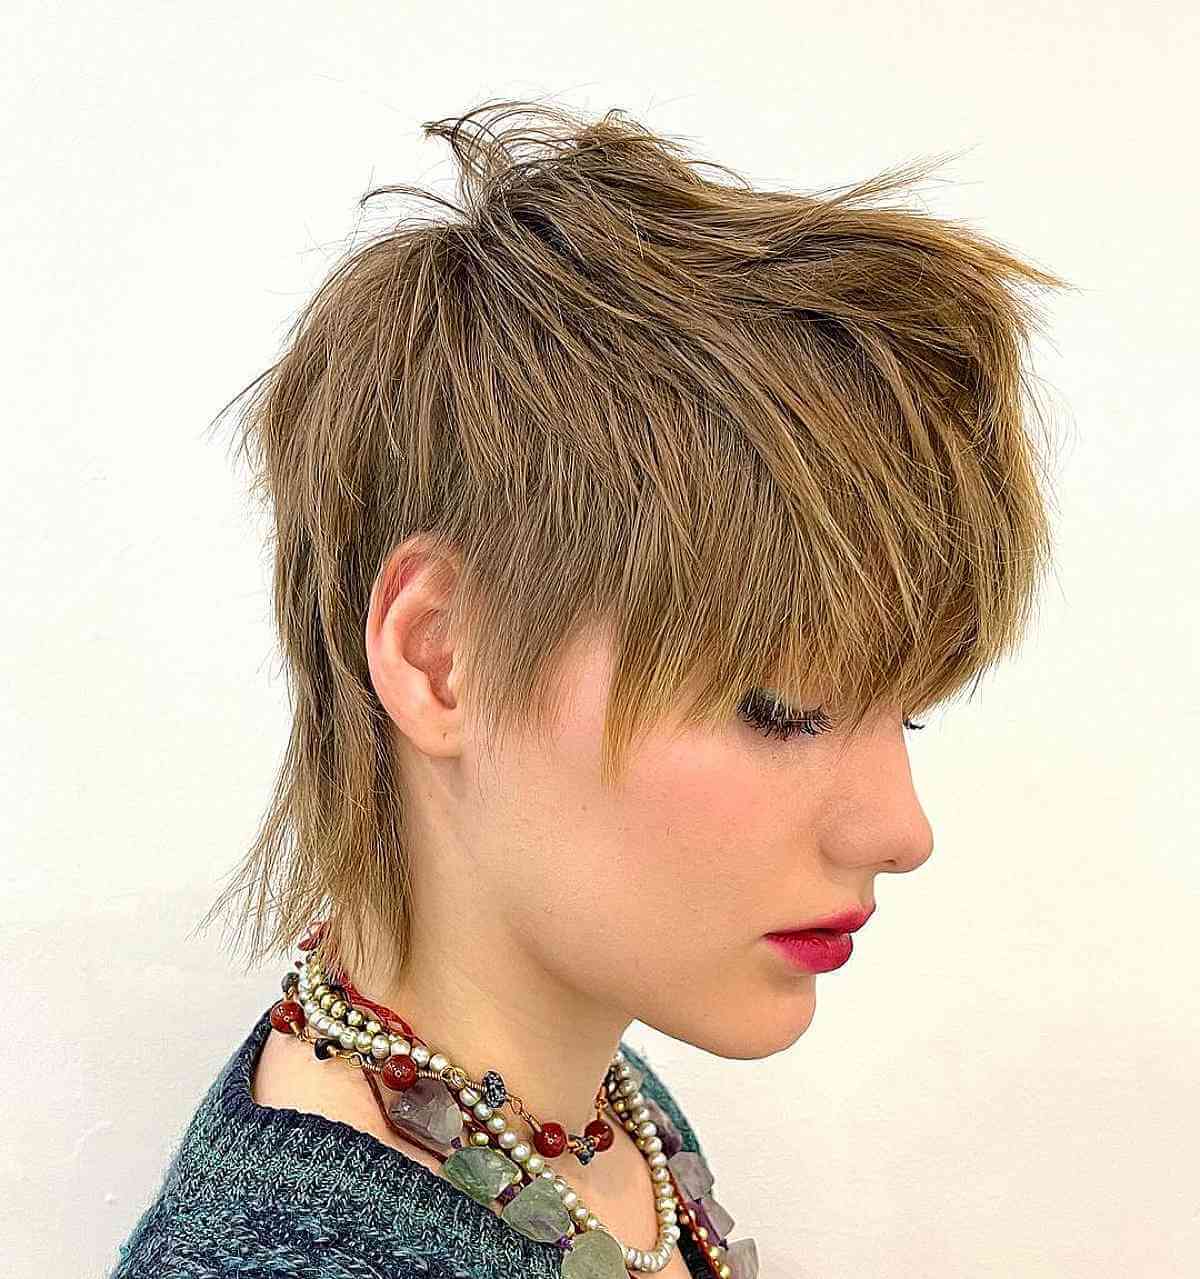 Multi-Layered Short Mullet with Choppy Layers